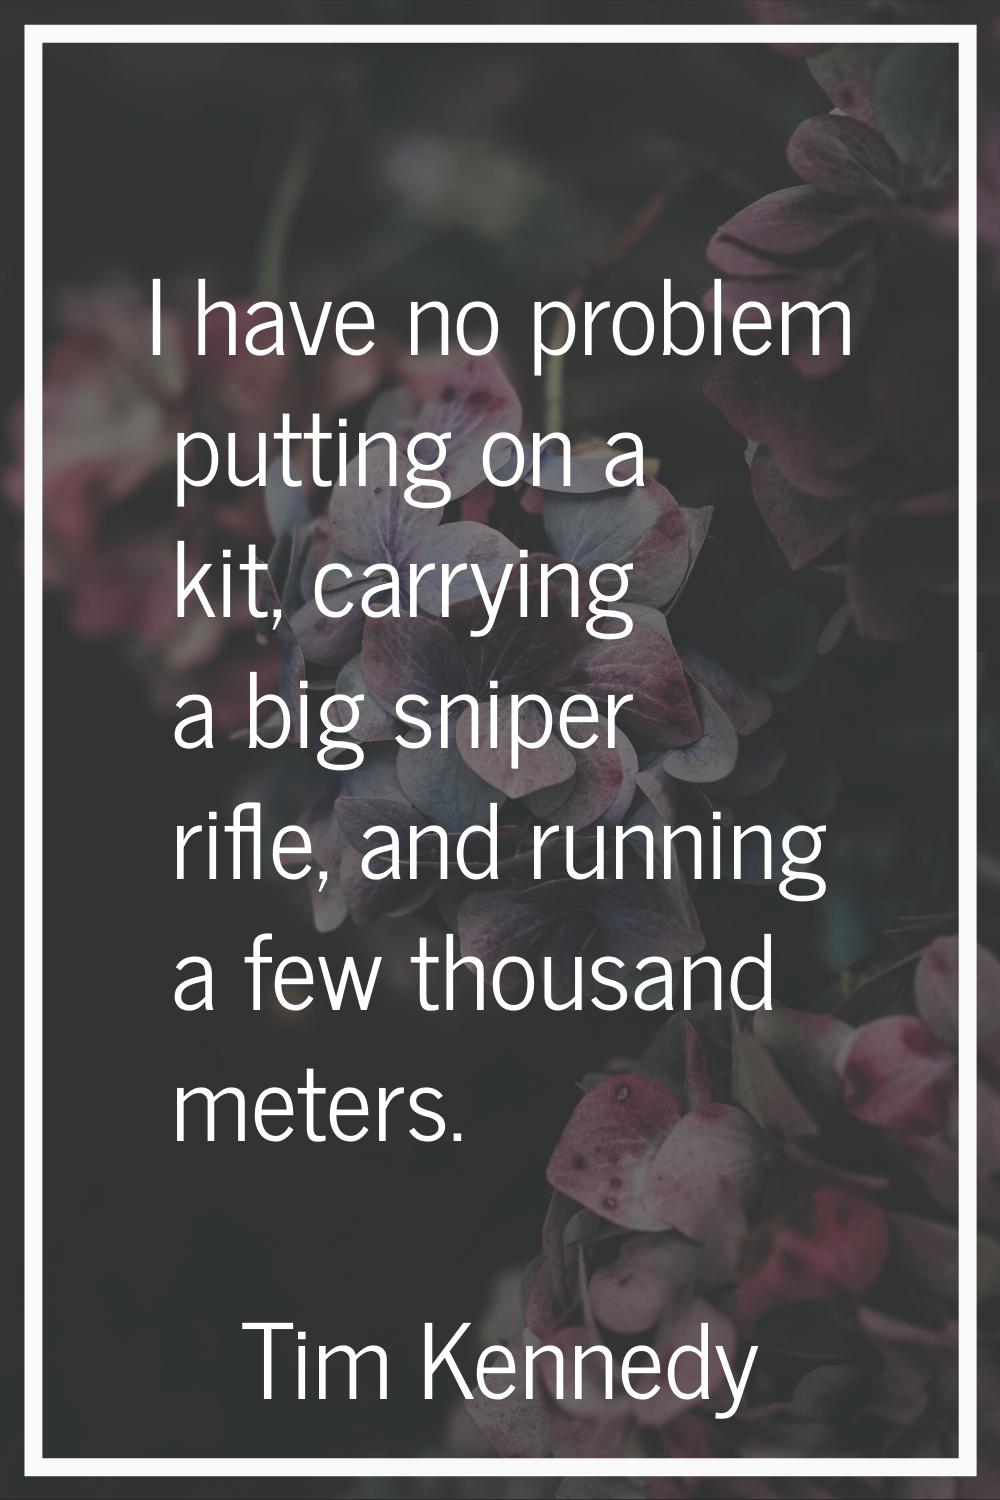 I have no problem putting on a kit, carrying a big sniper rifle, and running a few thousand meters.